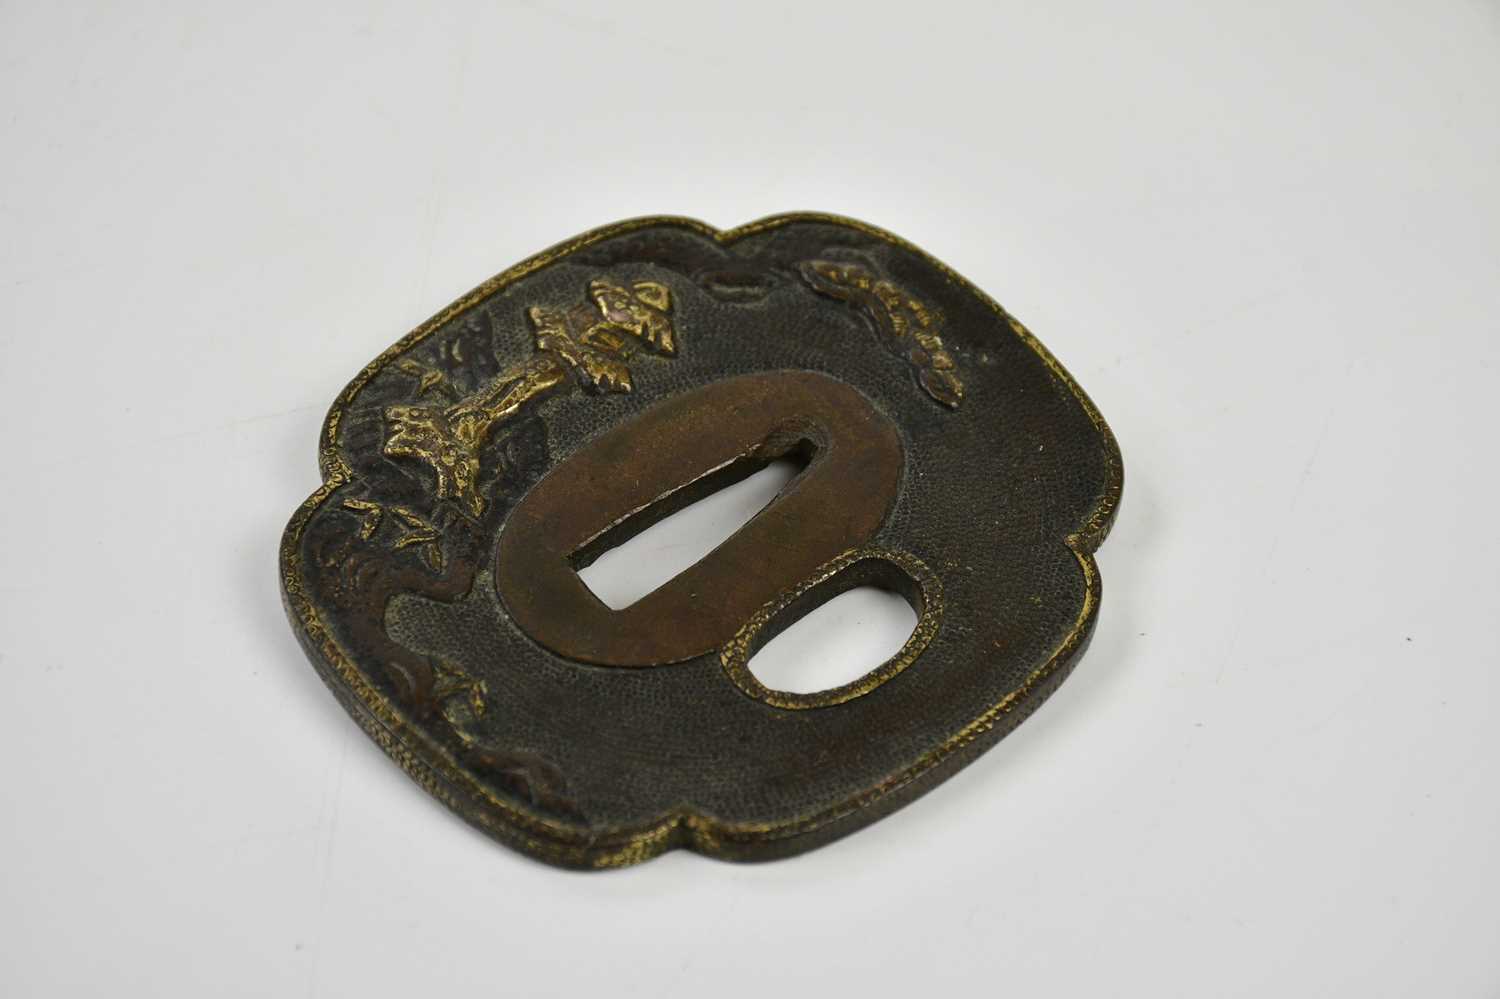 A Japanese bronze tsuba with gilt highlights, approx 7 x 6cm. - Image 4 of 4